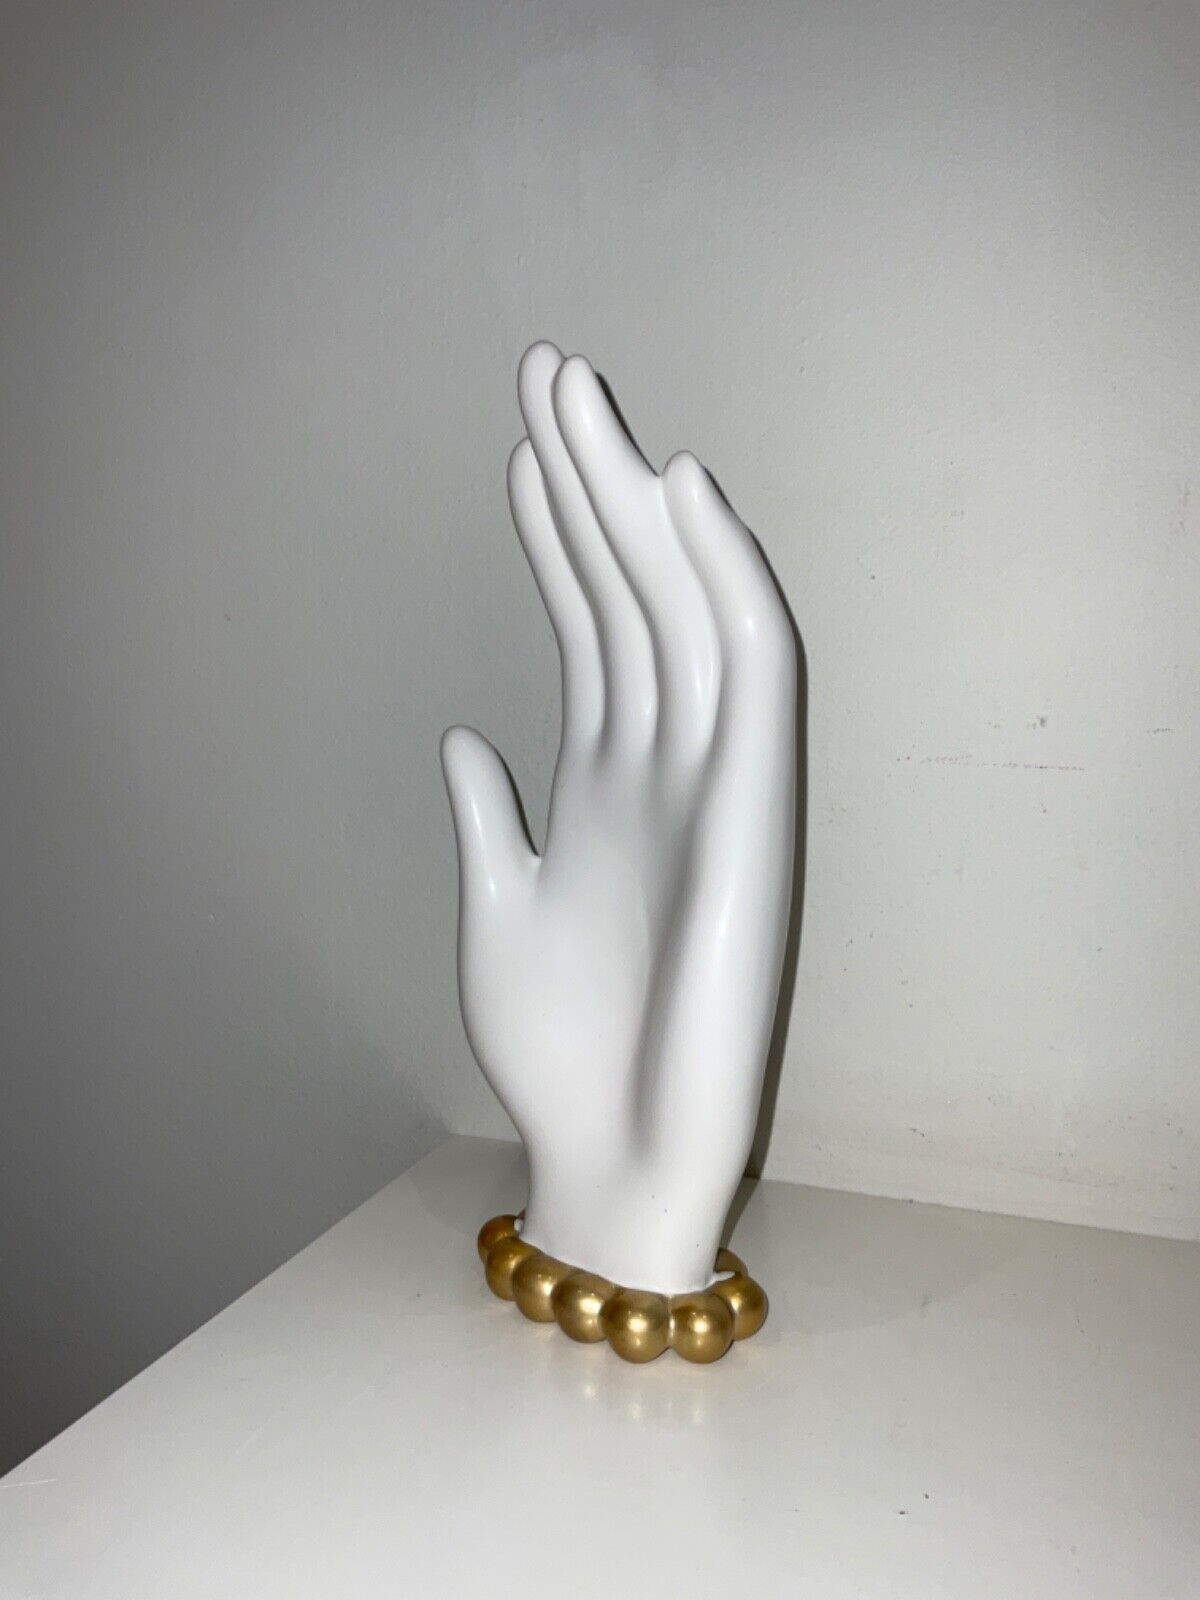 Victorian Trading Co Ceramic Lady’s Hand with golden cuff